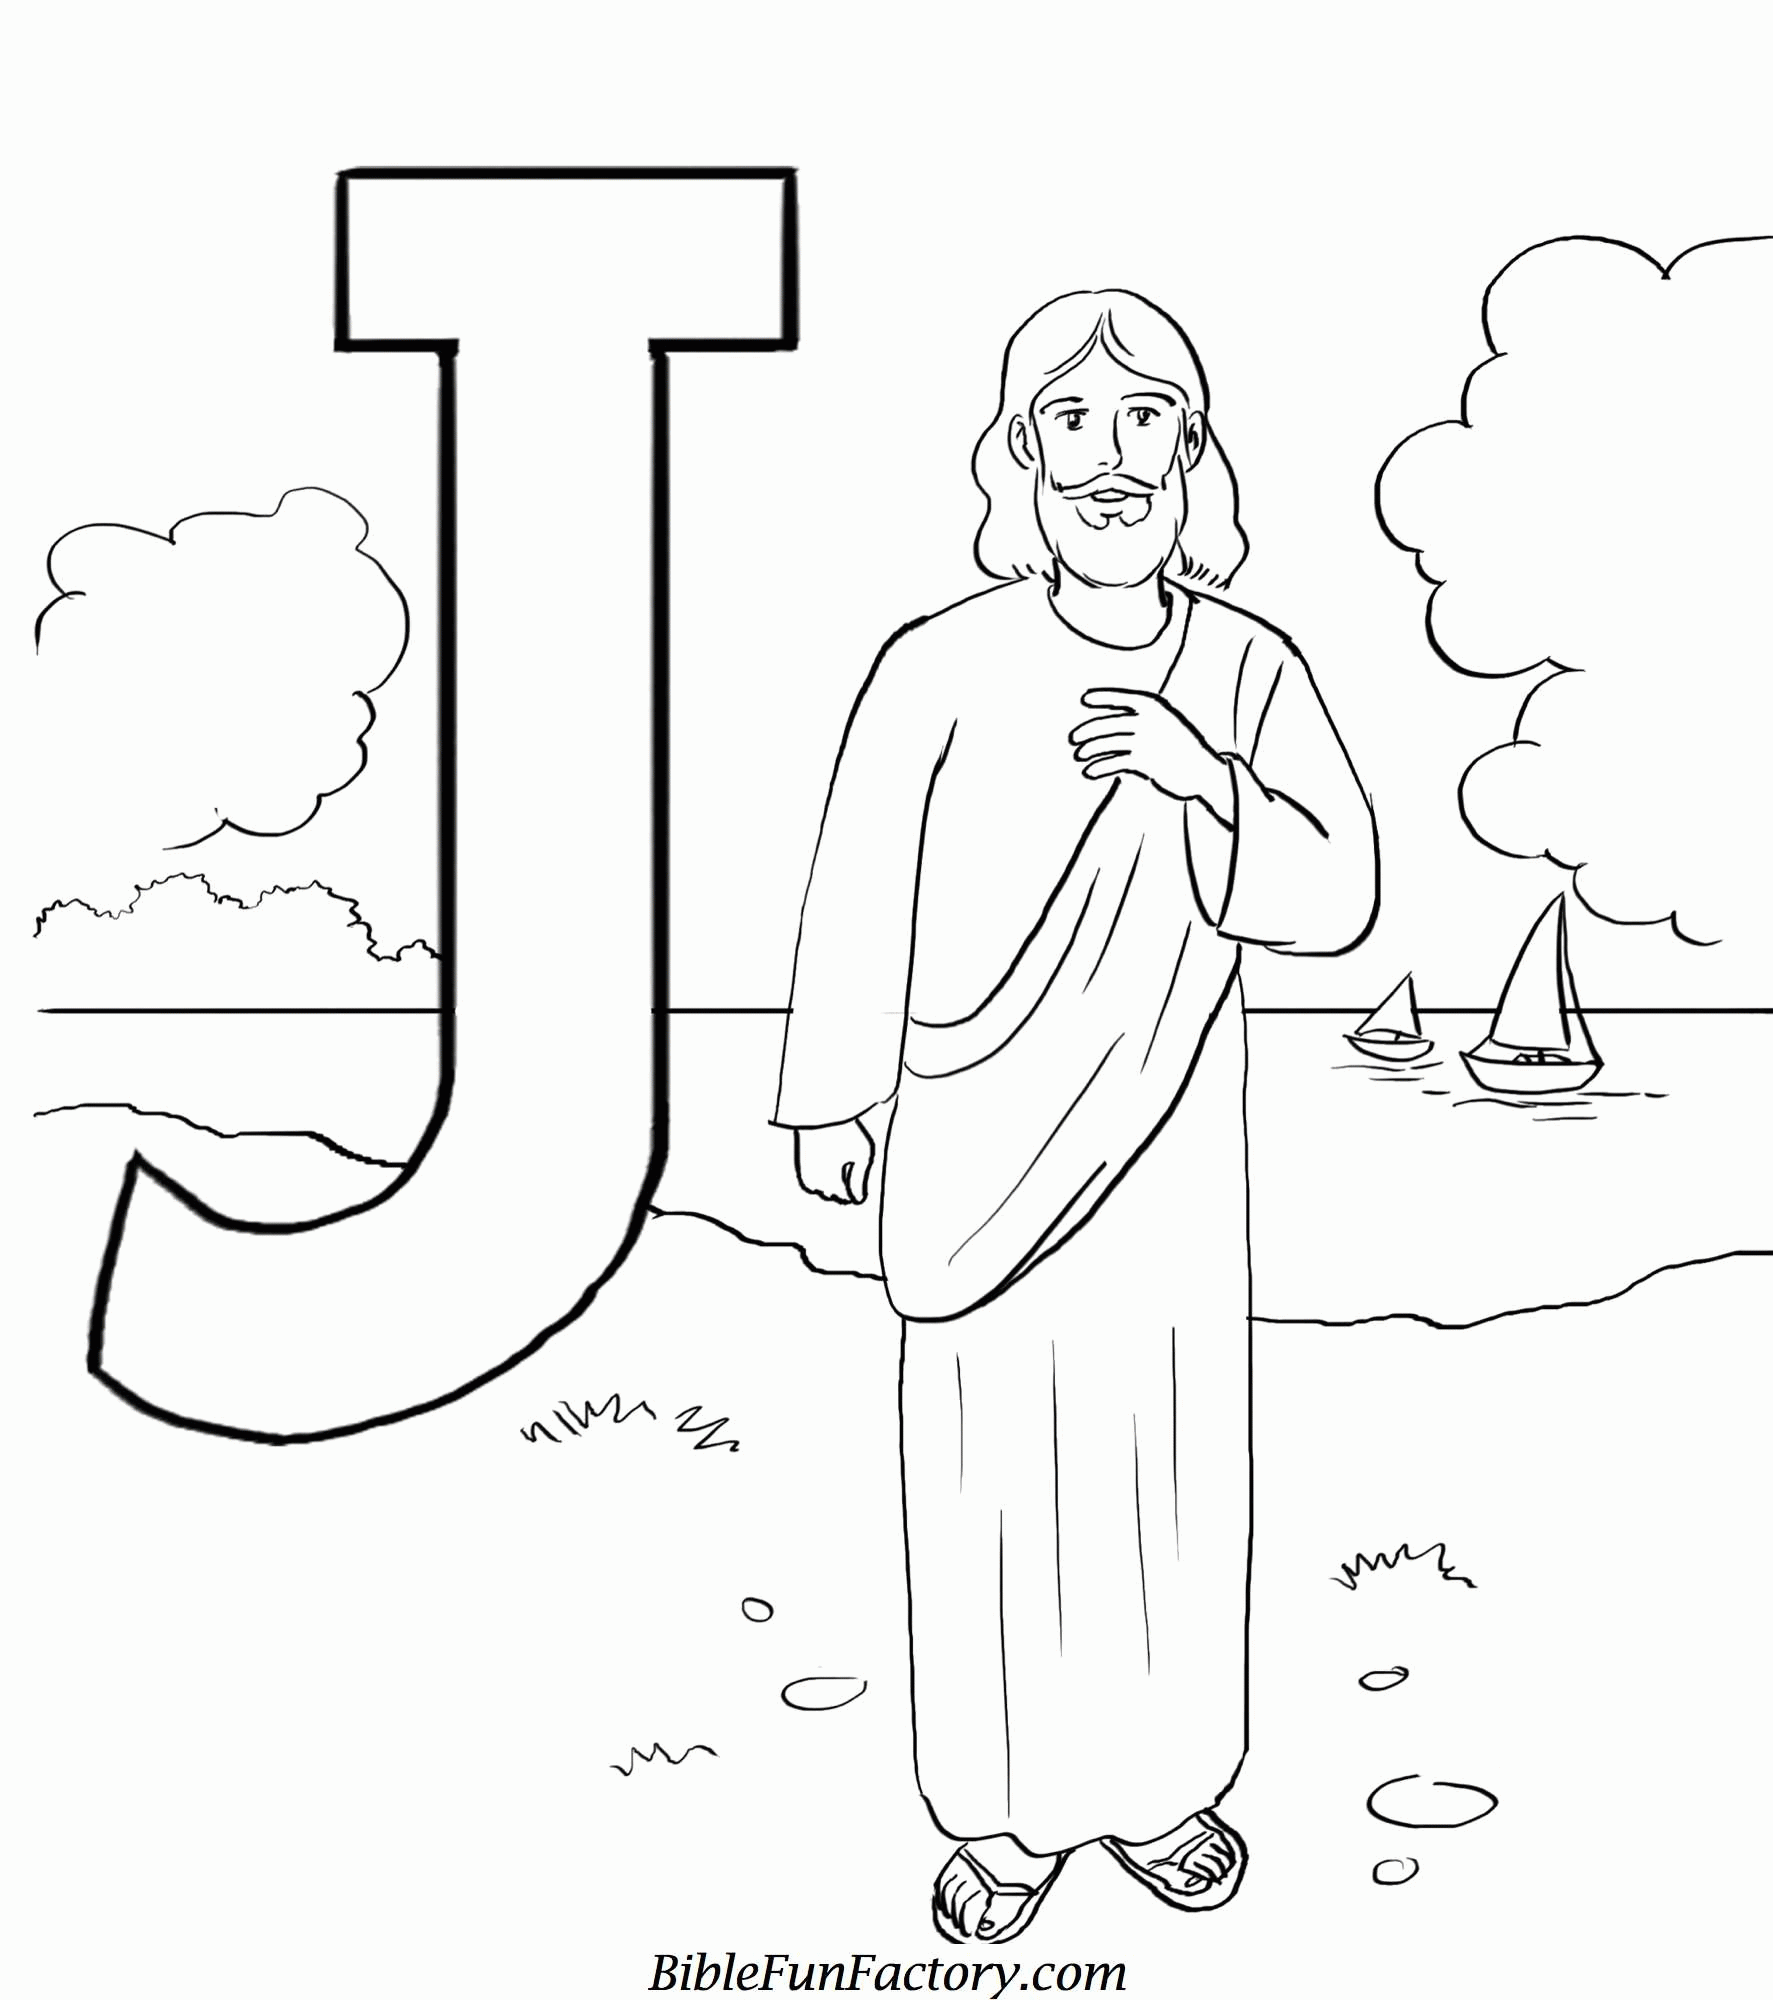 Free Printable Jesus Coloring Pages | Free Coloring Pages